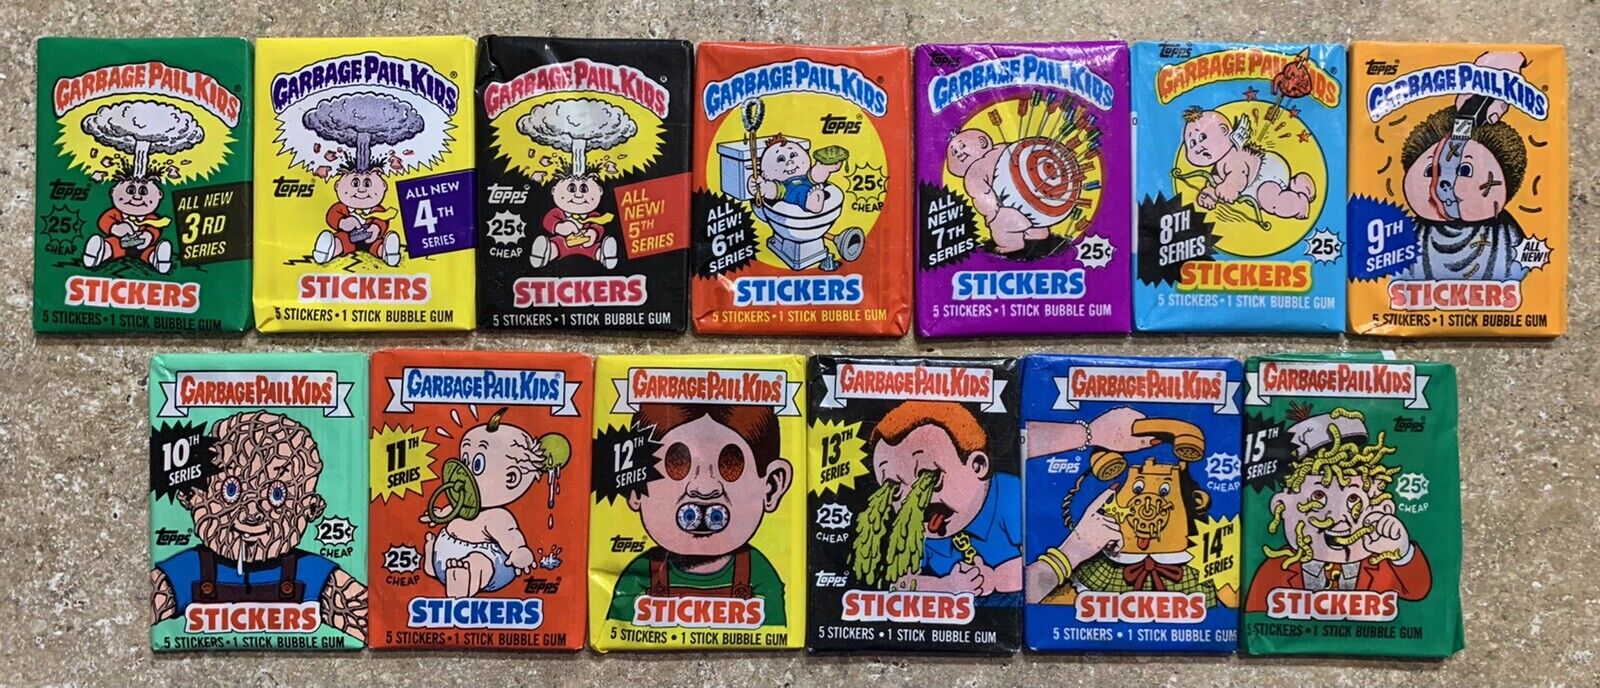 1986-88 Garbage Pail Kids 13-Unopened Wax Pack Lot 3rd-15th Series-NICE LOT TWT